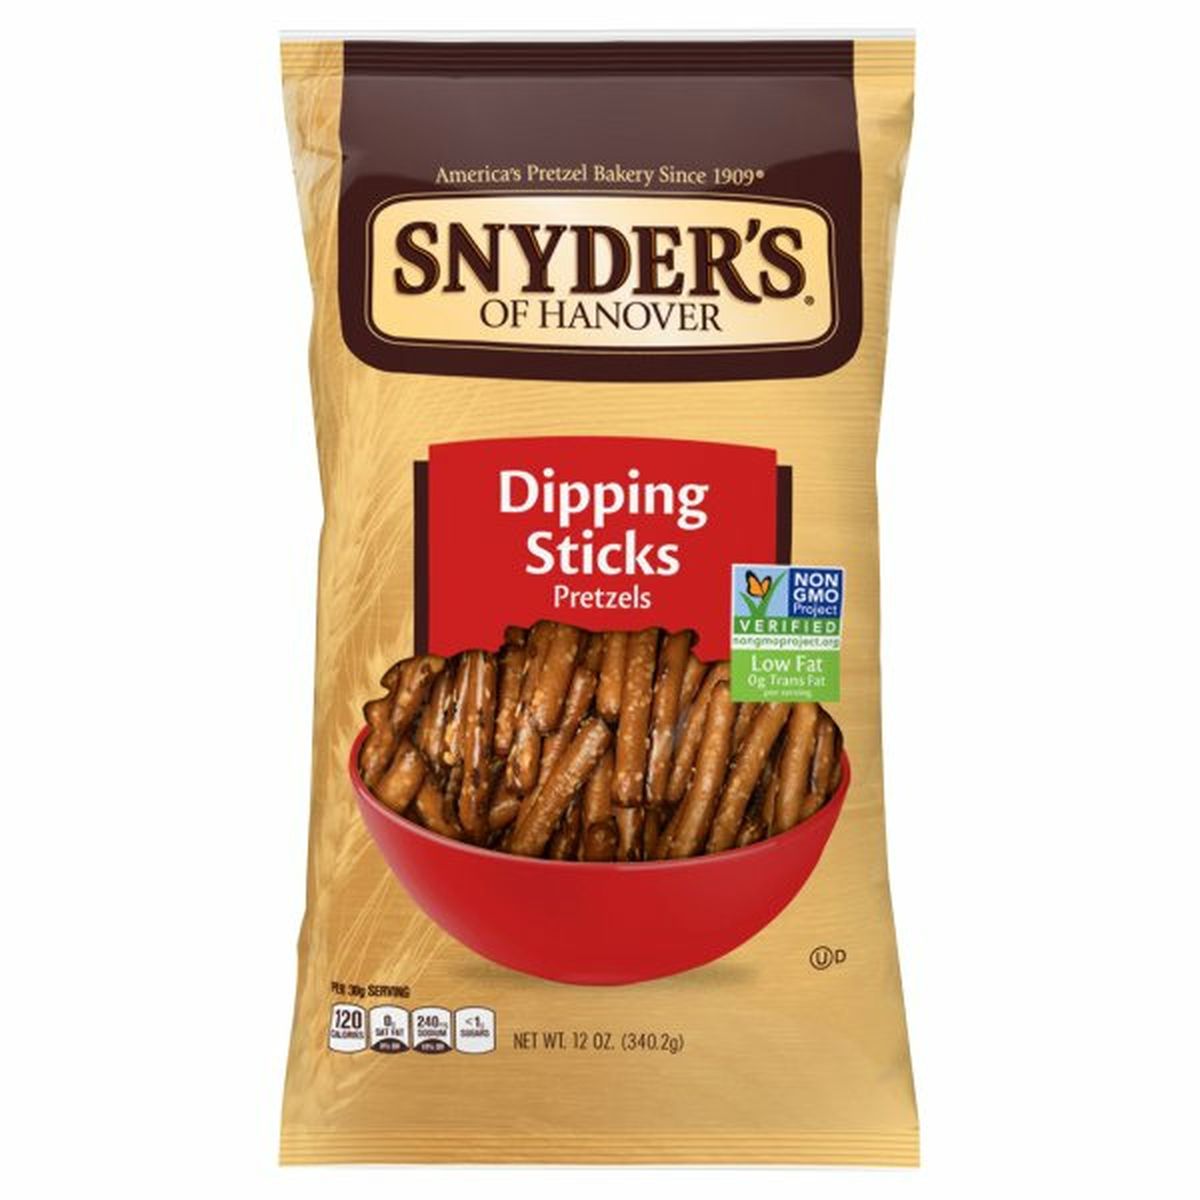 Calories in Snyder's of Hanovers Pretzels, Dipping Sticks